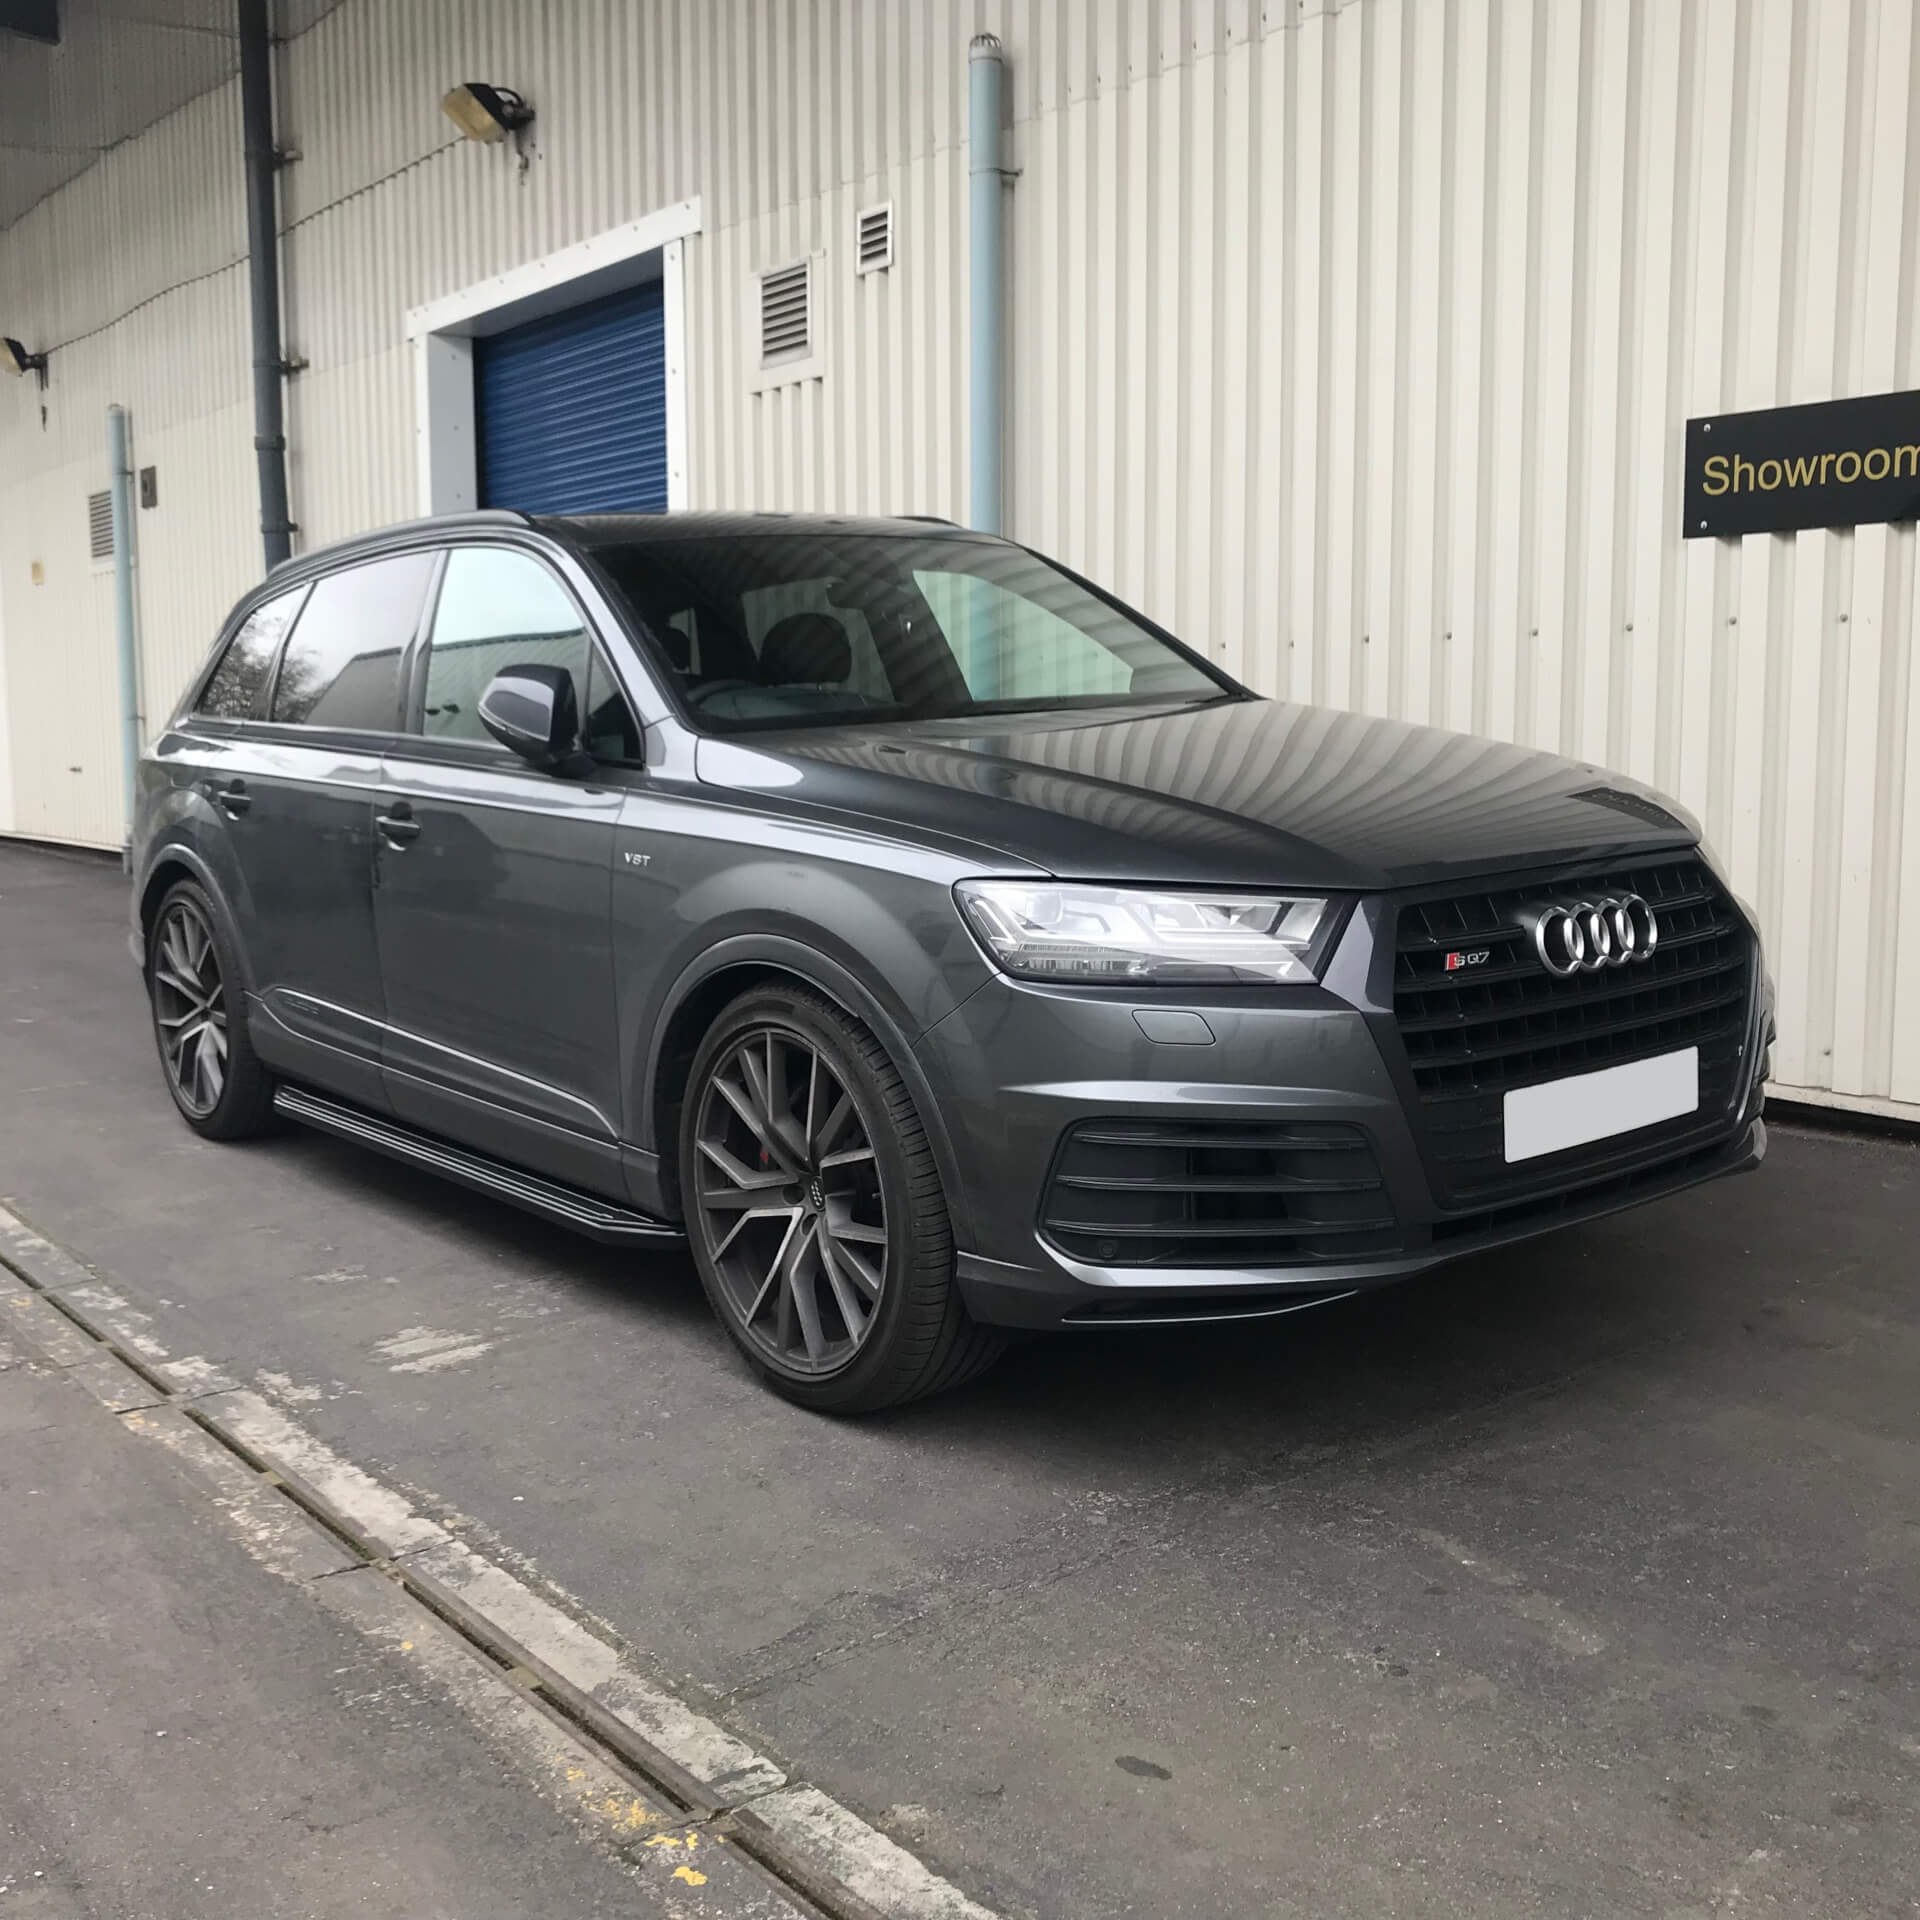 Direct4x4 accessories for Audi Q7 vehicles with a photo of a dark grey Q7 outside our showroom